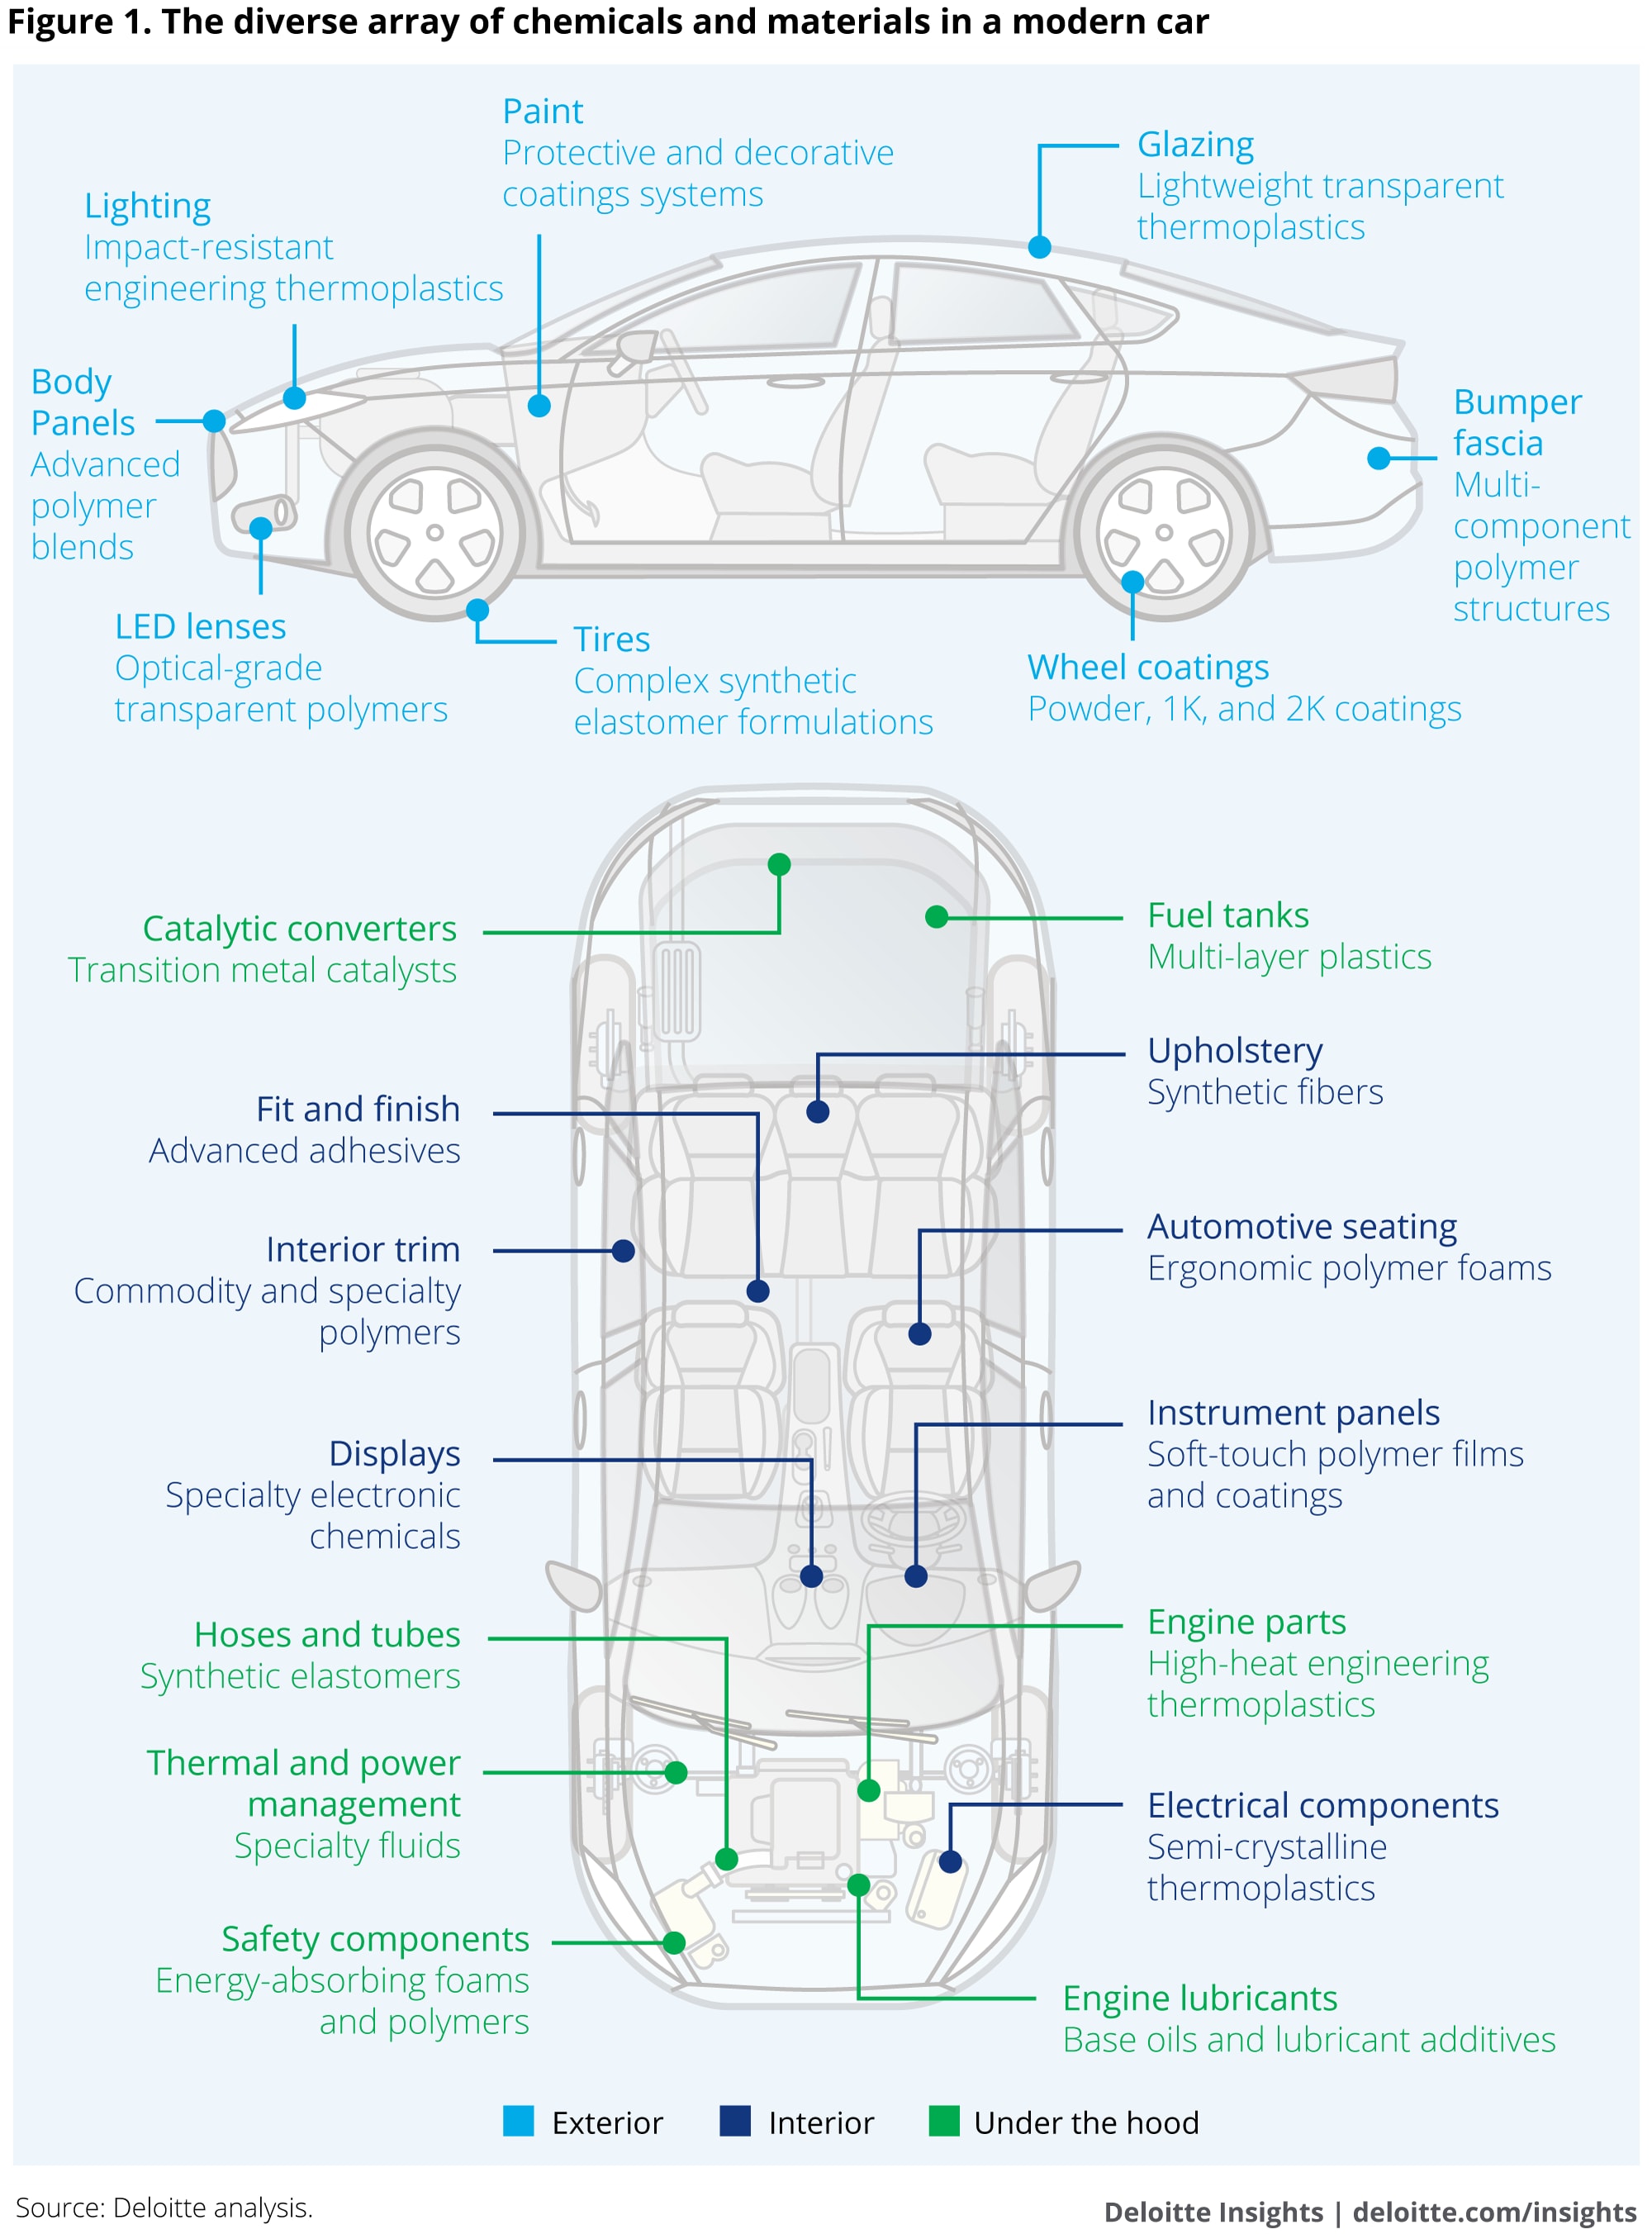 The diverse array of chemicals and materials in a modern car